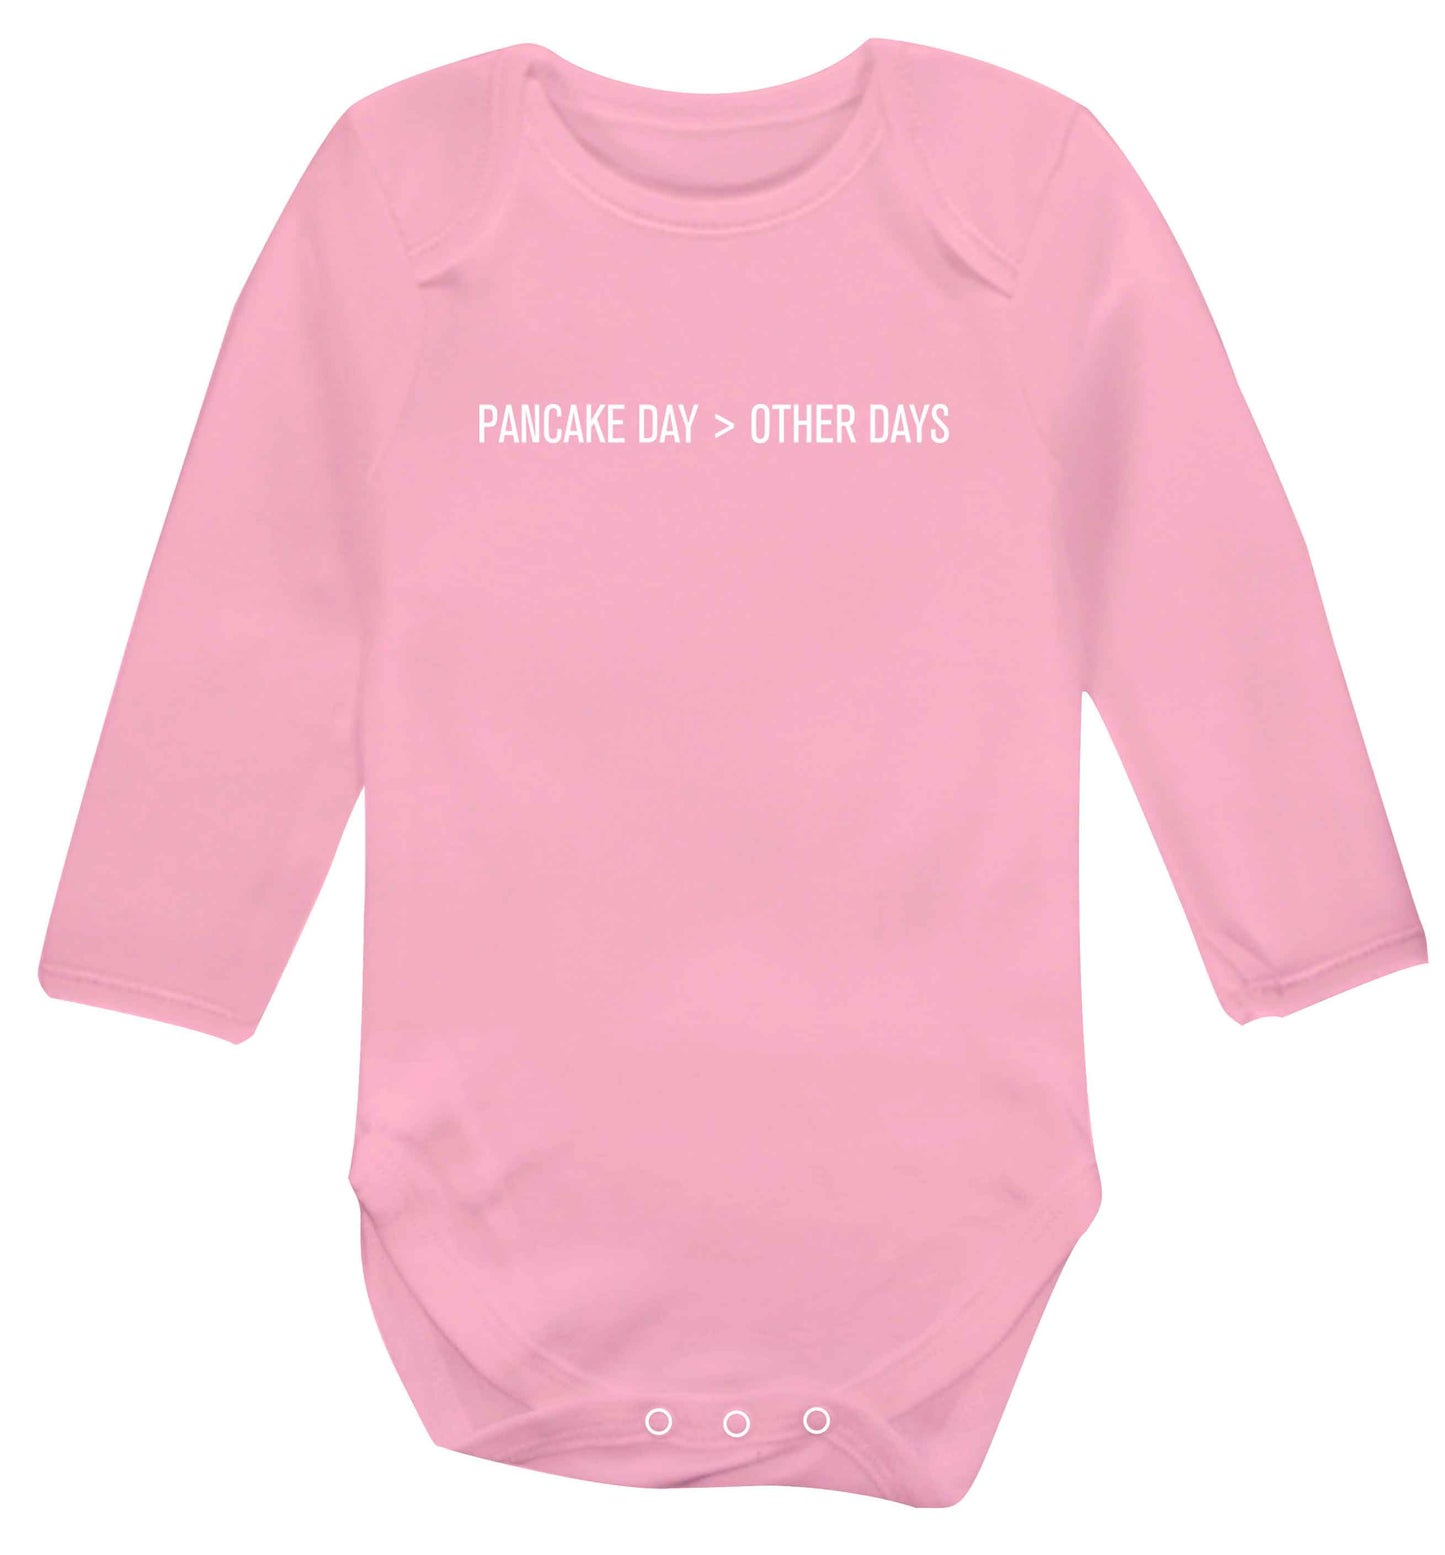 Pancake day > other days baby vest long sleeved pale pink 6-12 months